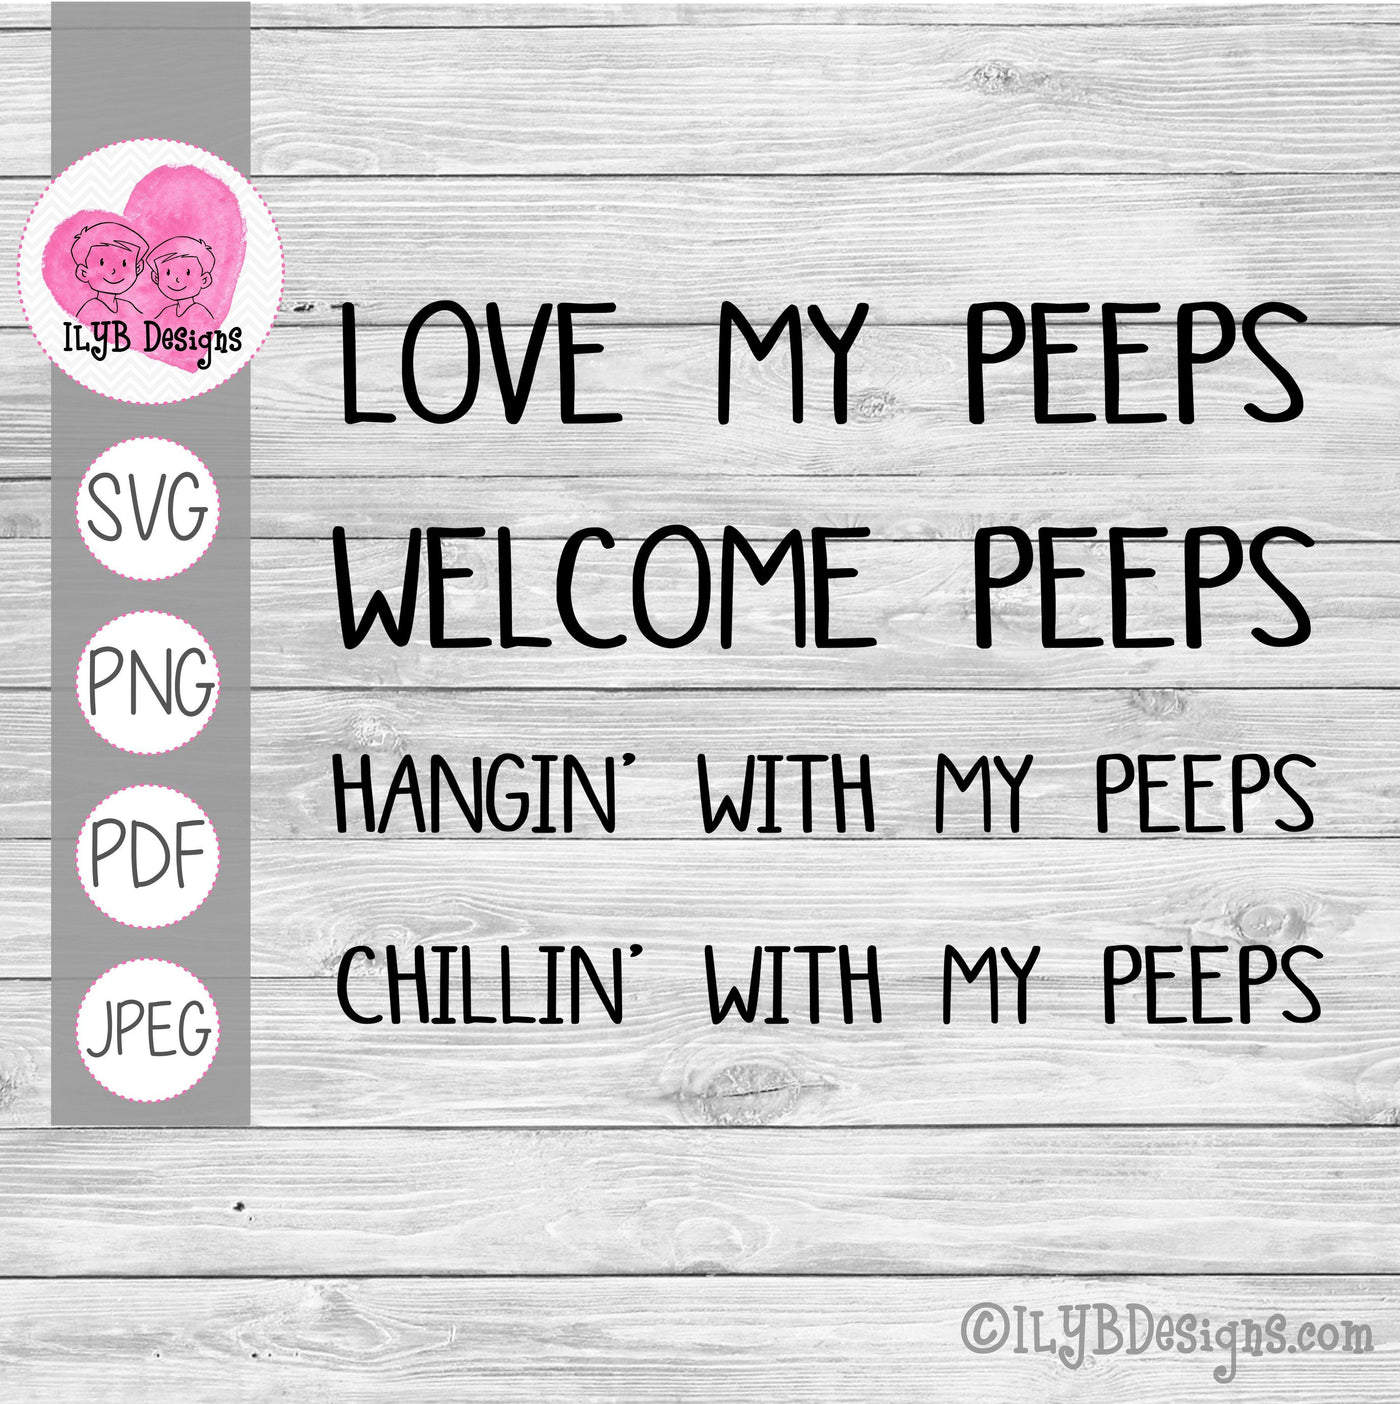 Love My Peeps, Welcome Peeps, Chillin' With My Peeps, Hangin' With My Peeps - SVG, PNG, JPEG, PDF Files - ILYB Designs